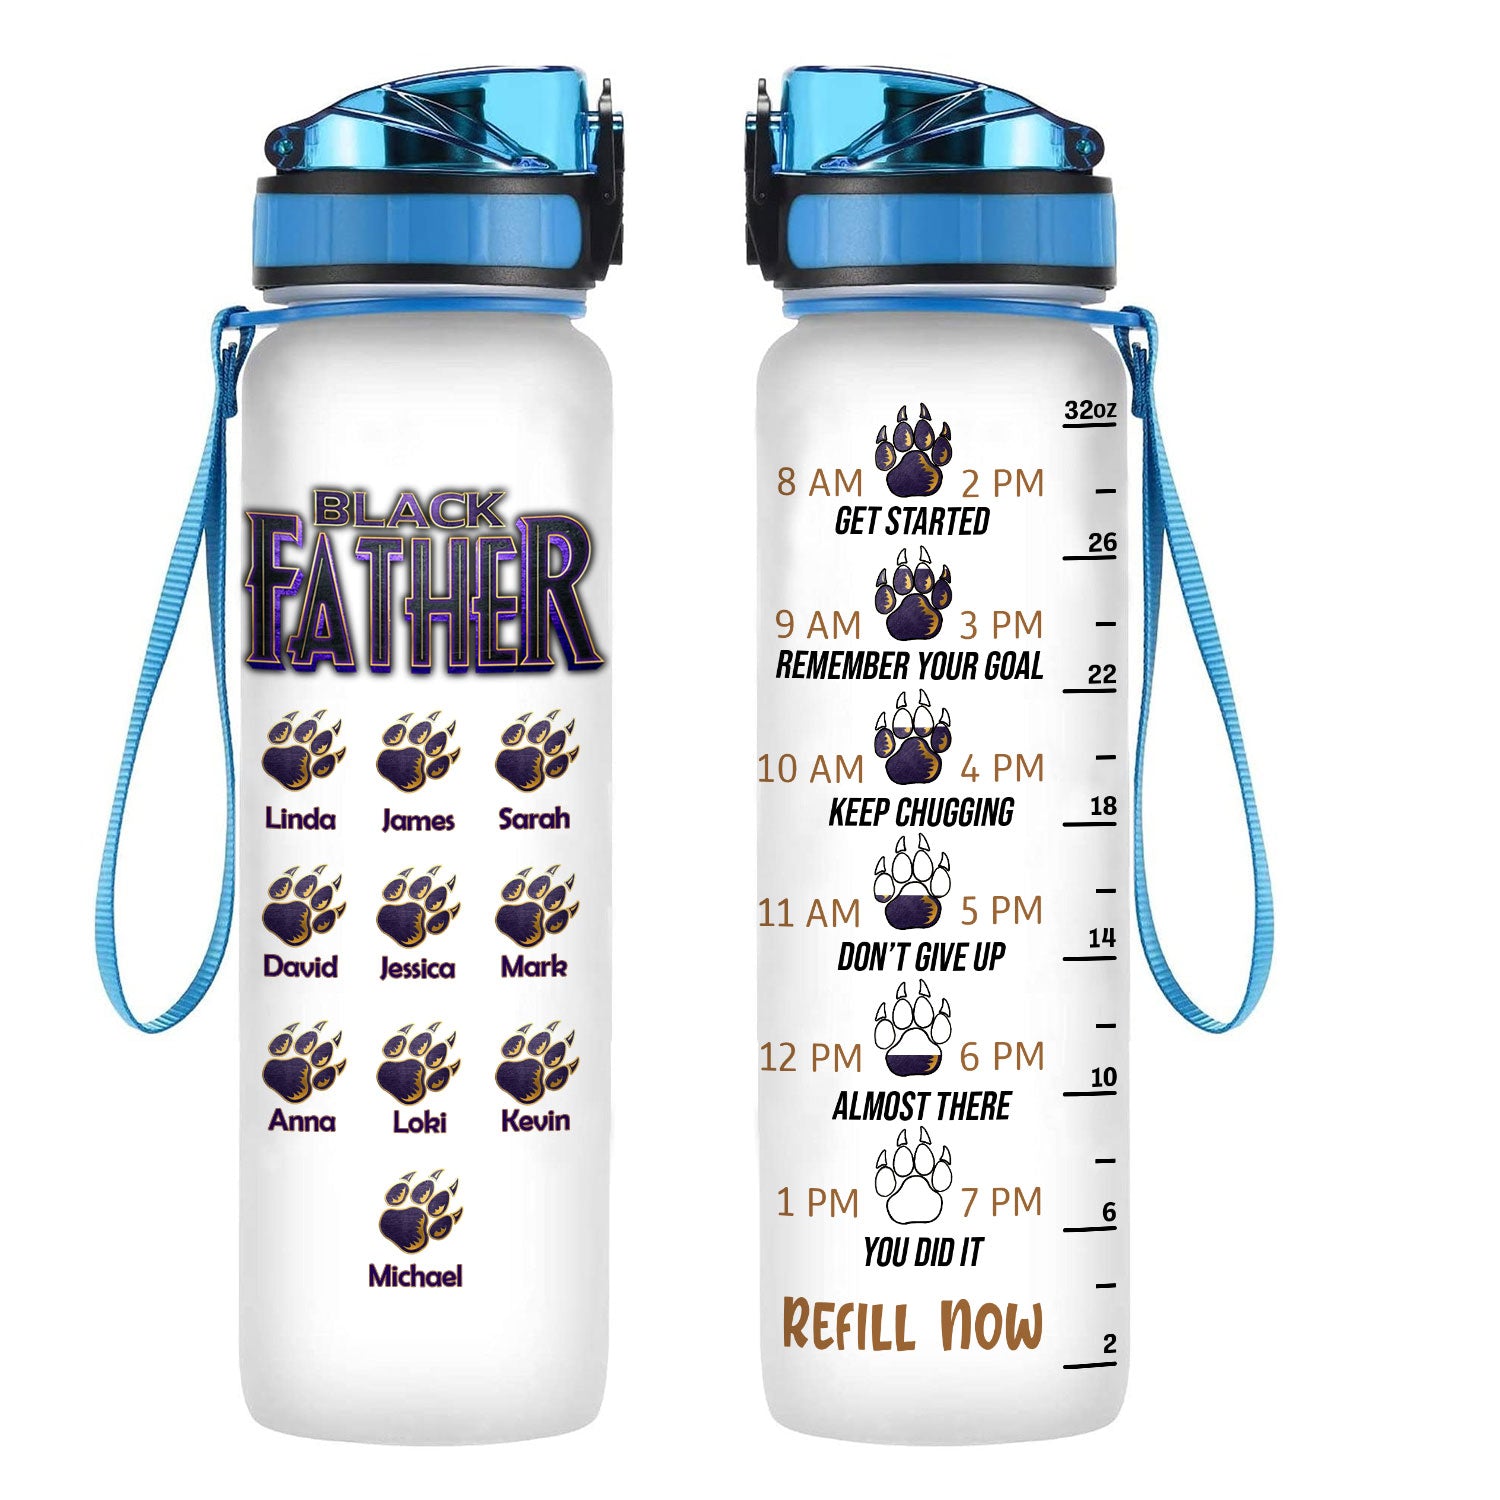 Panther Black Father, Father's Day Gift - Personalized Water Tracker Bottle - Gift for Father